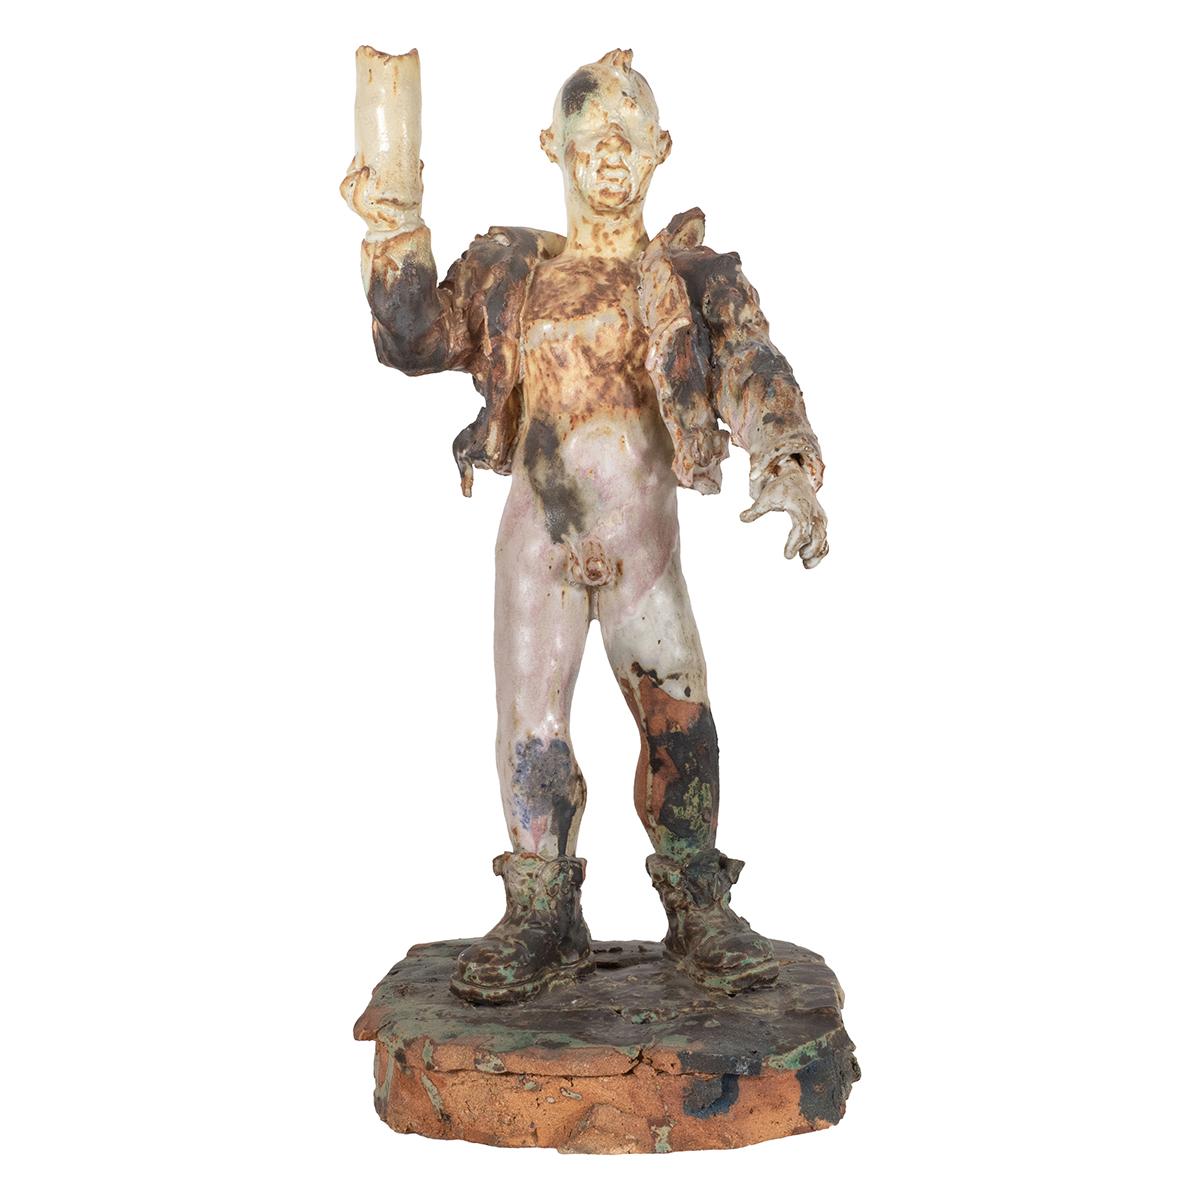 Whimsical ceramic fountain sculpture depicting a pantless man.